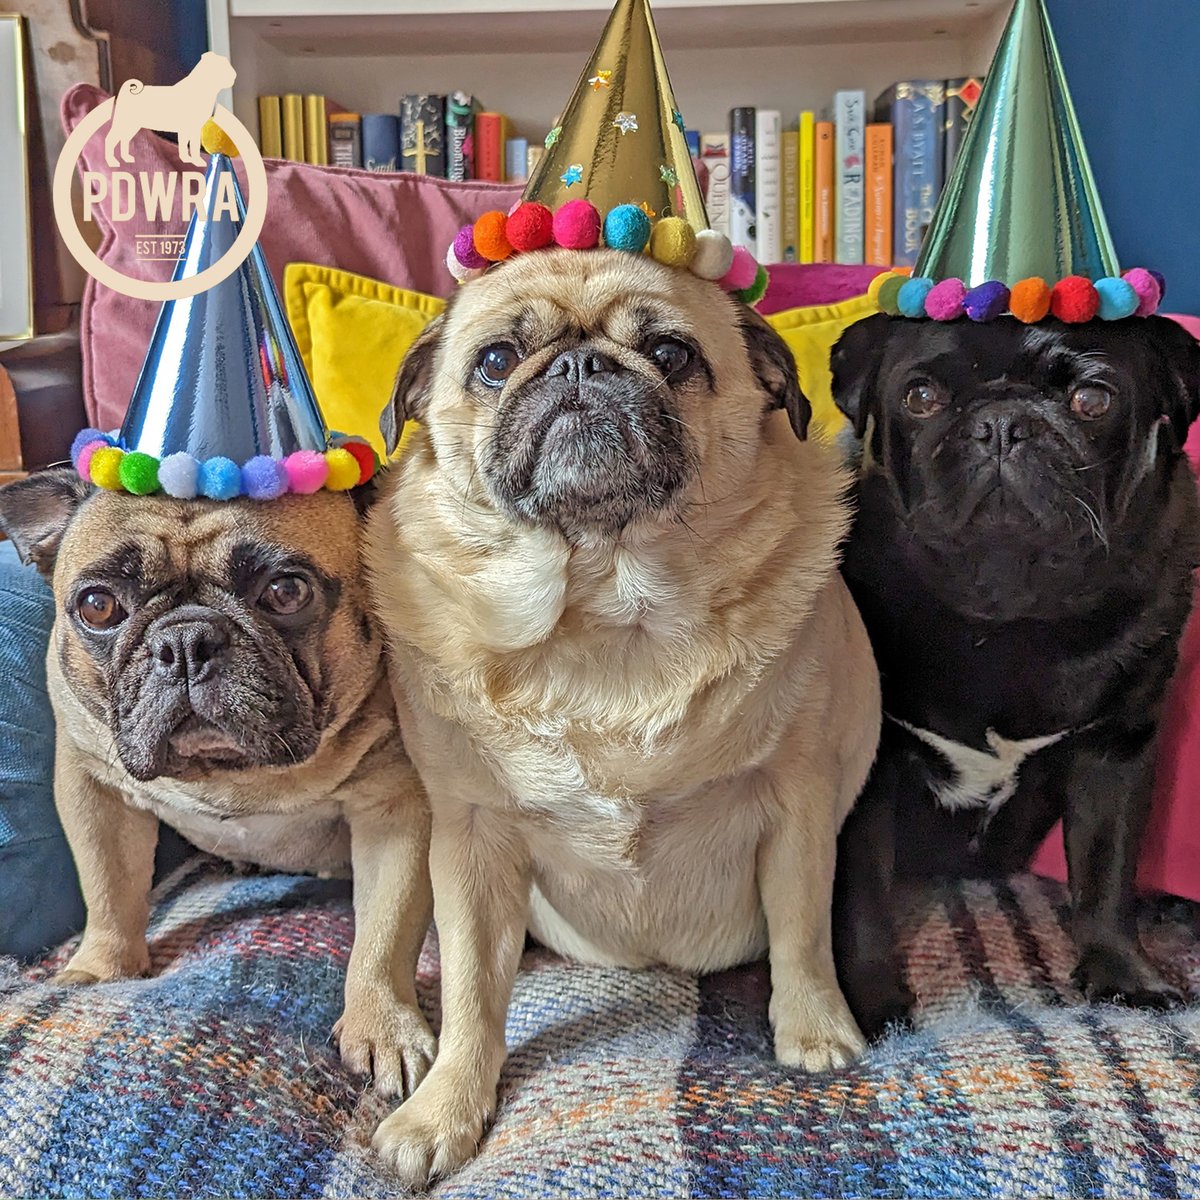 In April’s newsletter we featured Carolyn and her 3 PDWRA adoptees, Meverick, Elsie & Frank. Carolyn told us all about her adoption story and what it’s like to be mum to her tribe! - ecs.page.link/y39PR #pdwra #pugcharity#friendsofwelfare #foreverhome #pugadoption #pug